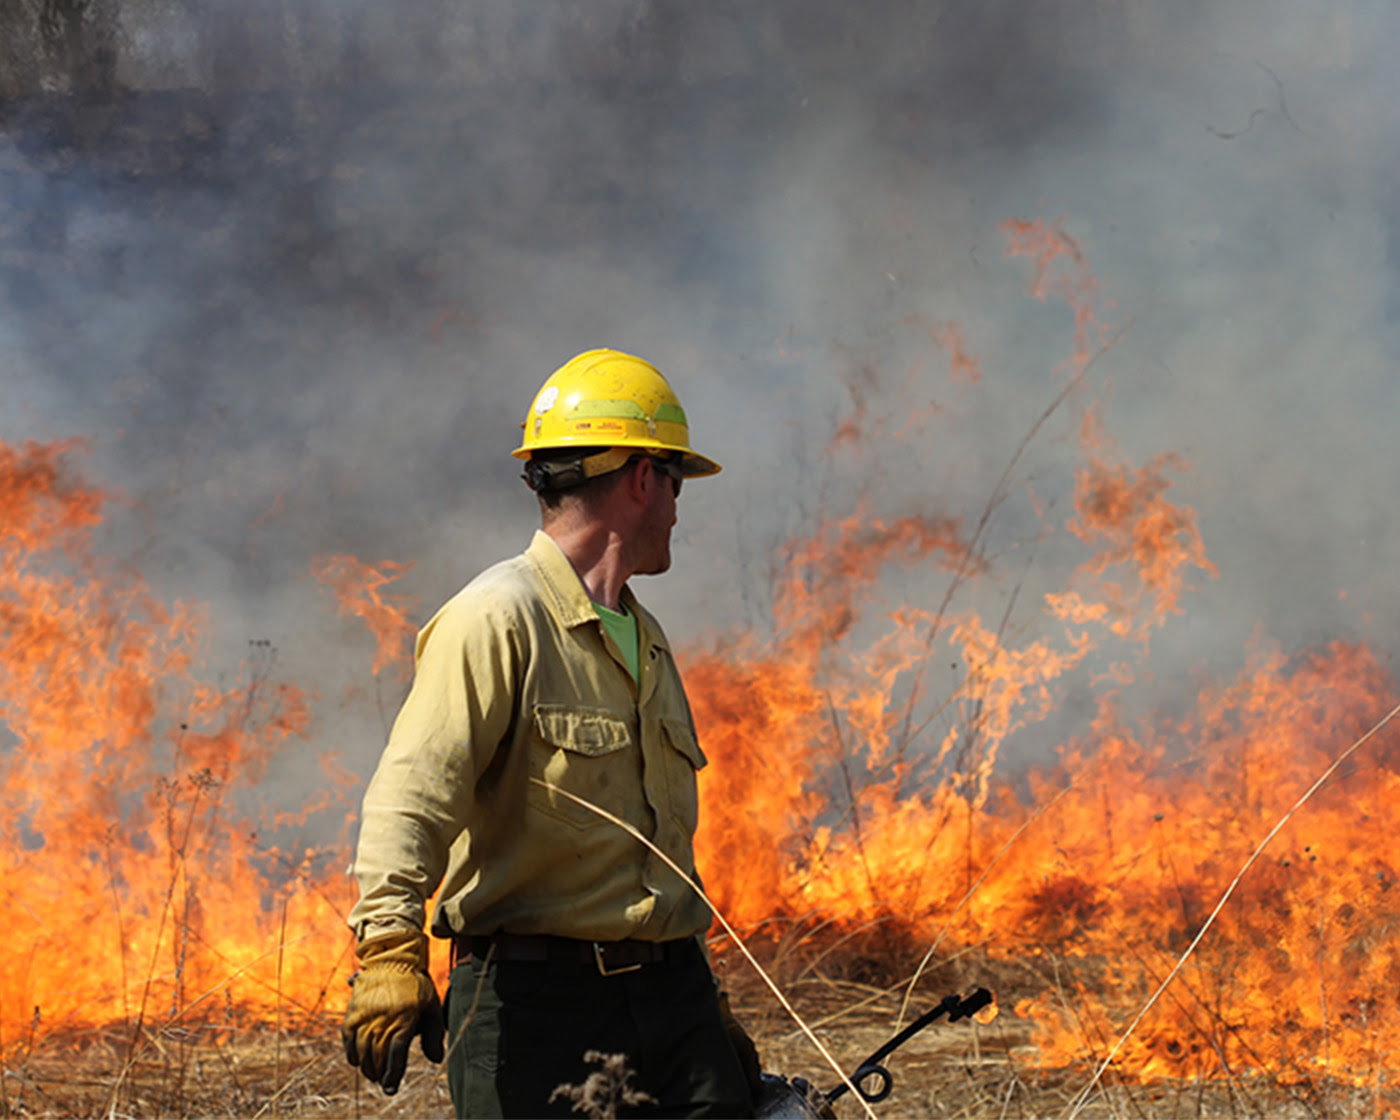 Computer modeling can help prescribed burn decisions